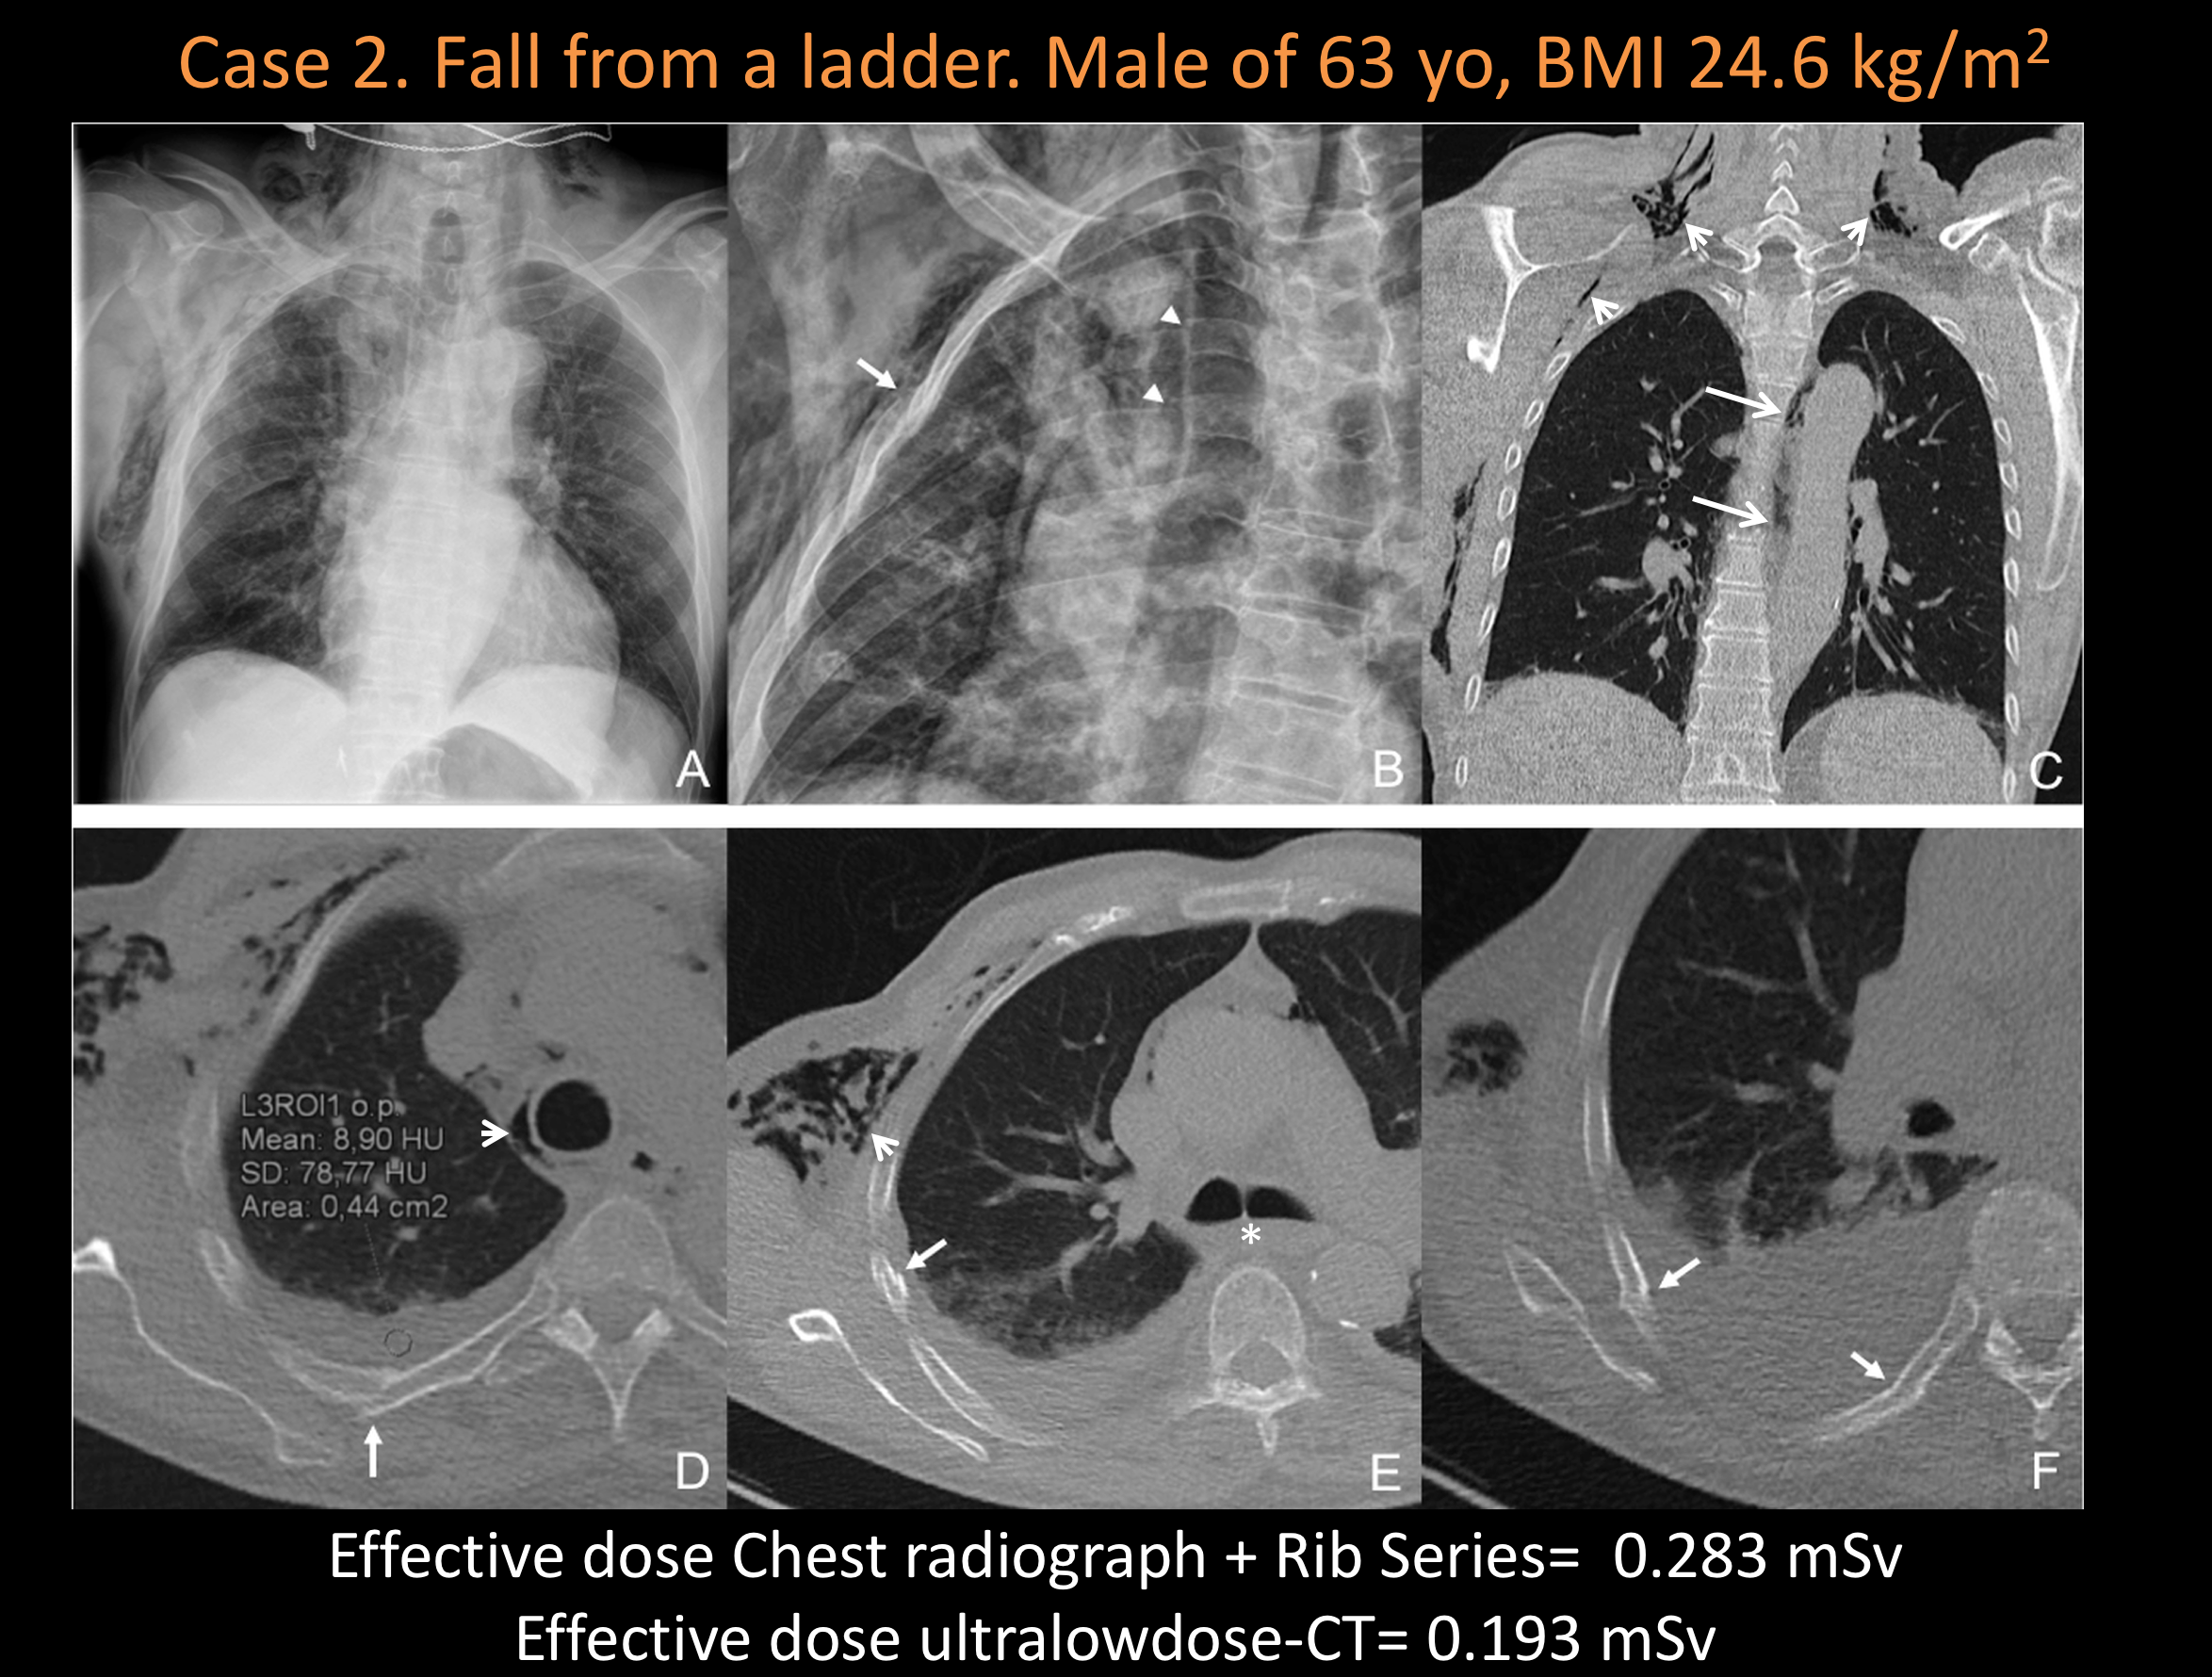 From cited article. “Chest radiographs AP view (A) and rib series (B). AP view demonstrates extensive subcutaneous emphysema and pneumomediastium (A). Fracture of the 3rd and 4th ribs were better visualized on rib series view (arrow) as well as pneu…